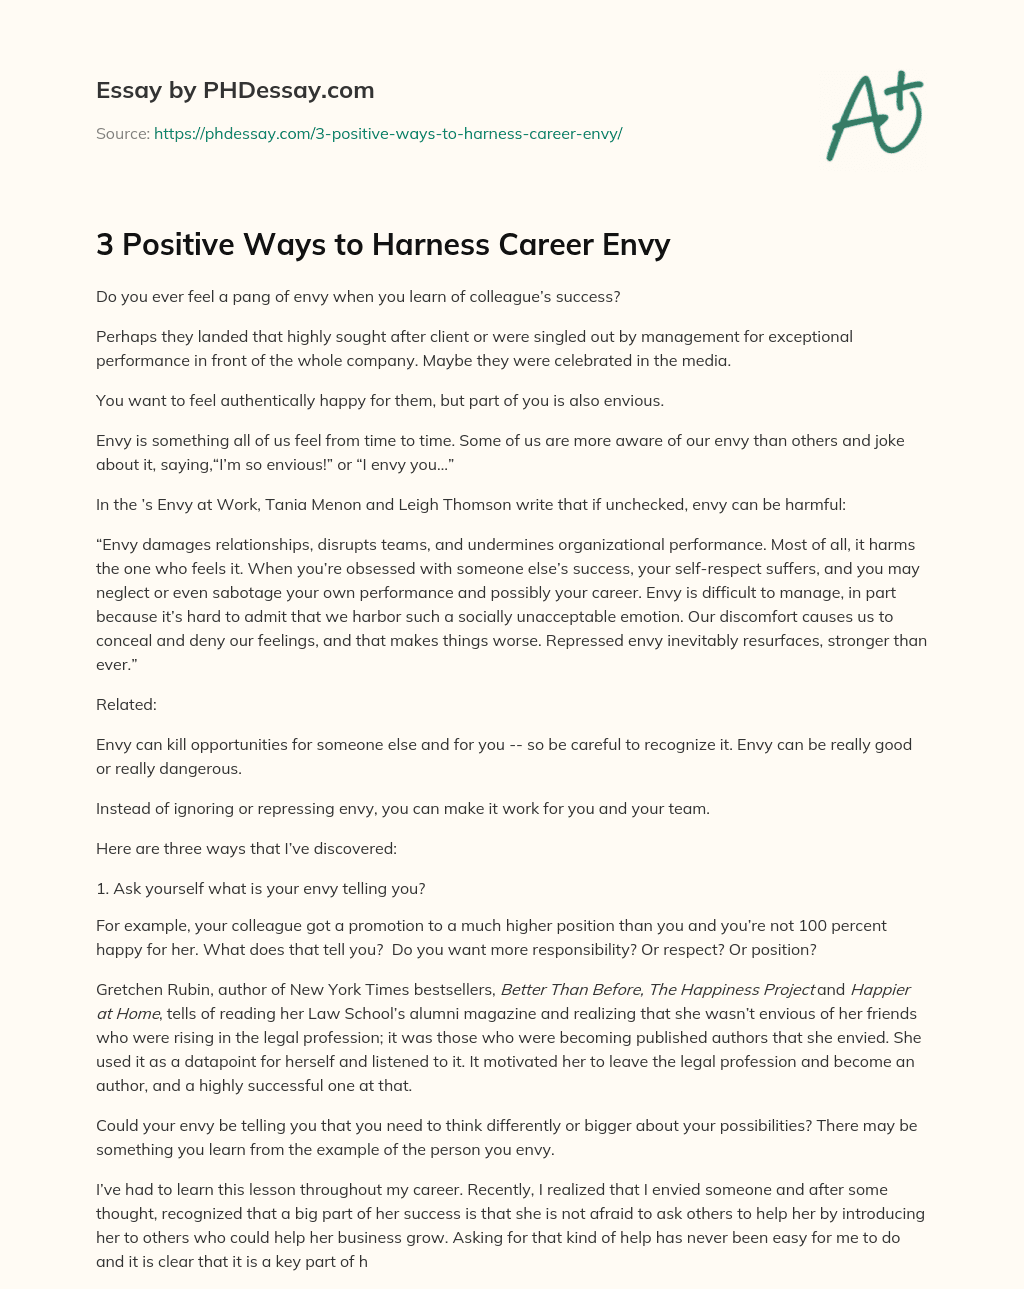 3 Positive Ways to Harness Career Envy essay